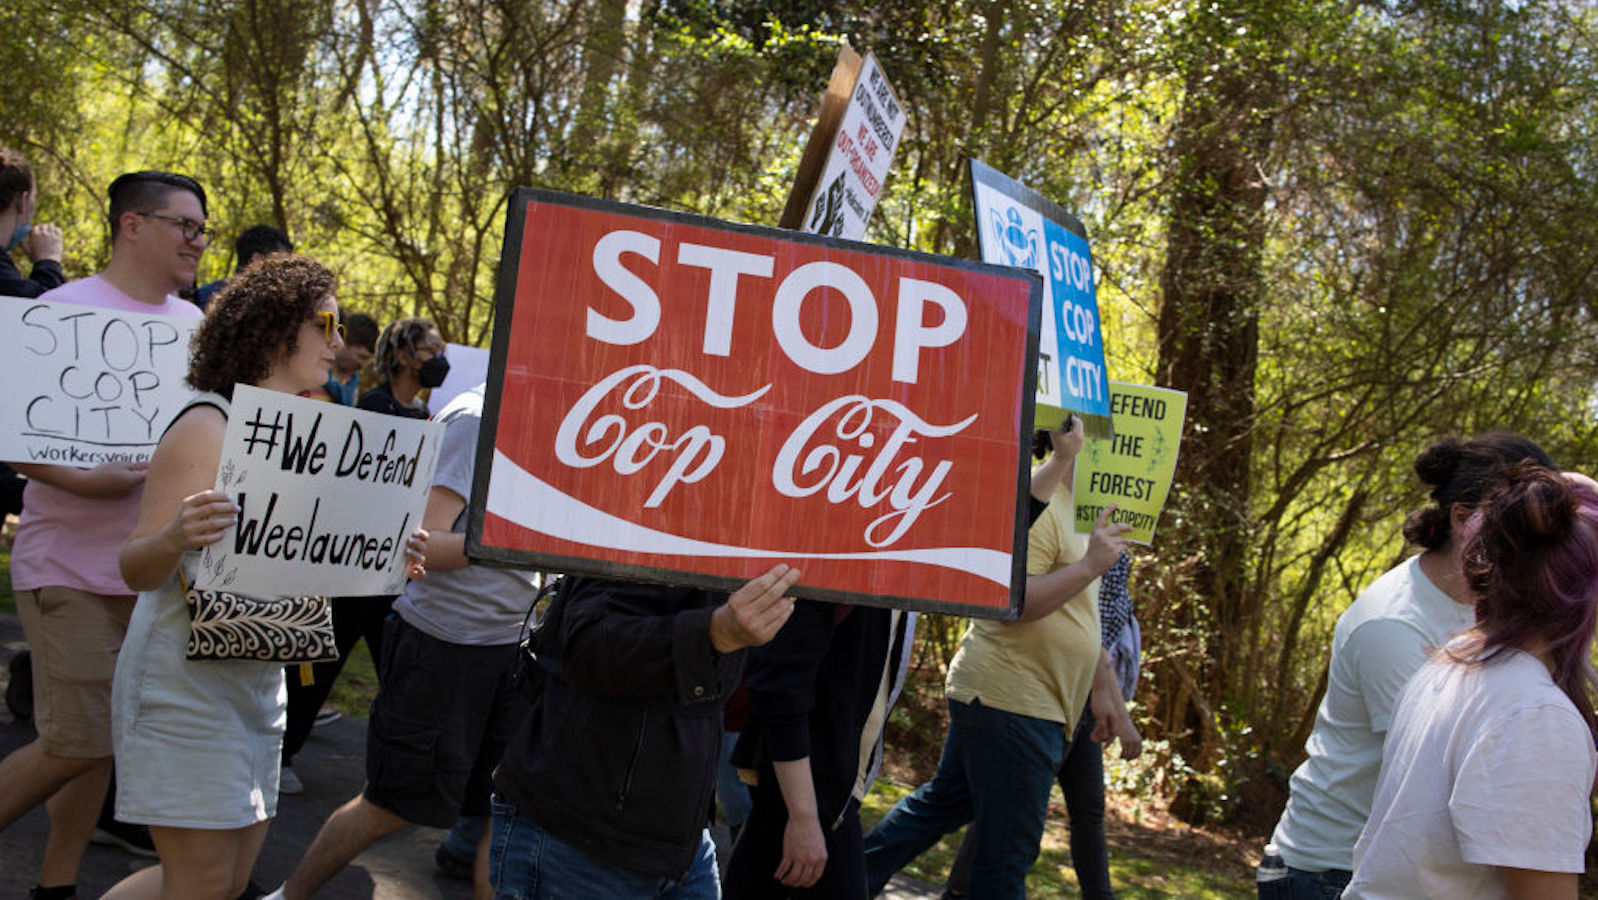 Environmental activists hold a rally and a march through the Atlanta Forest, a preserved forest Atlanta that is scheduled to be developed as a police training center, March 4, 2023 in Atlanta, Georgia. Intent upon stopping the building of what they have called cop city, the environmentalists were evicted from the forest in January, resulting in the killing by police of Manuel Teran, a young activist and medic.